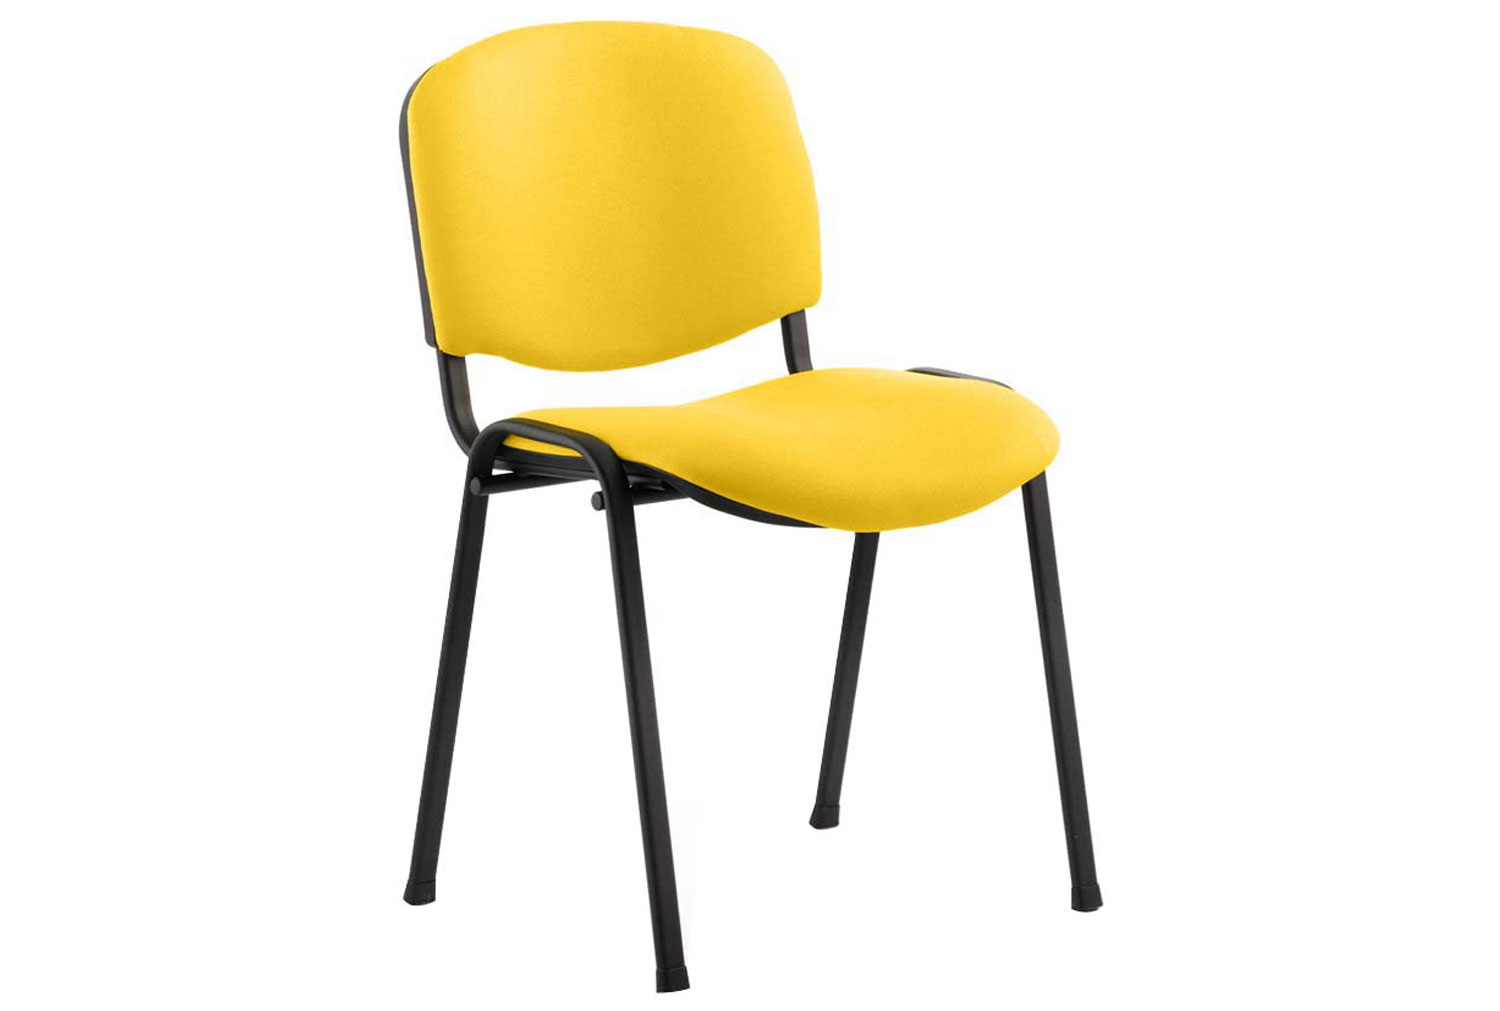 Qty 4 - ISO Black Frame Conference Office Chair (Senna Yellow)